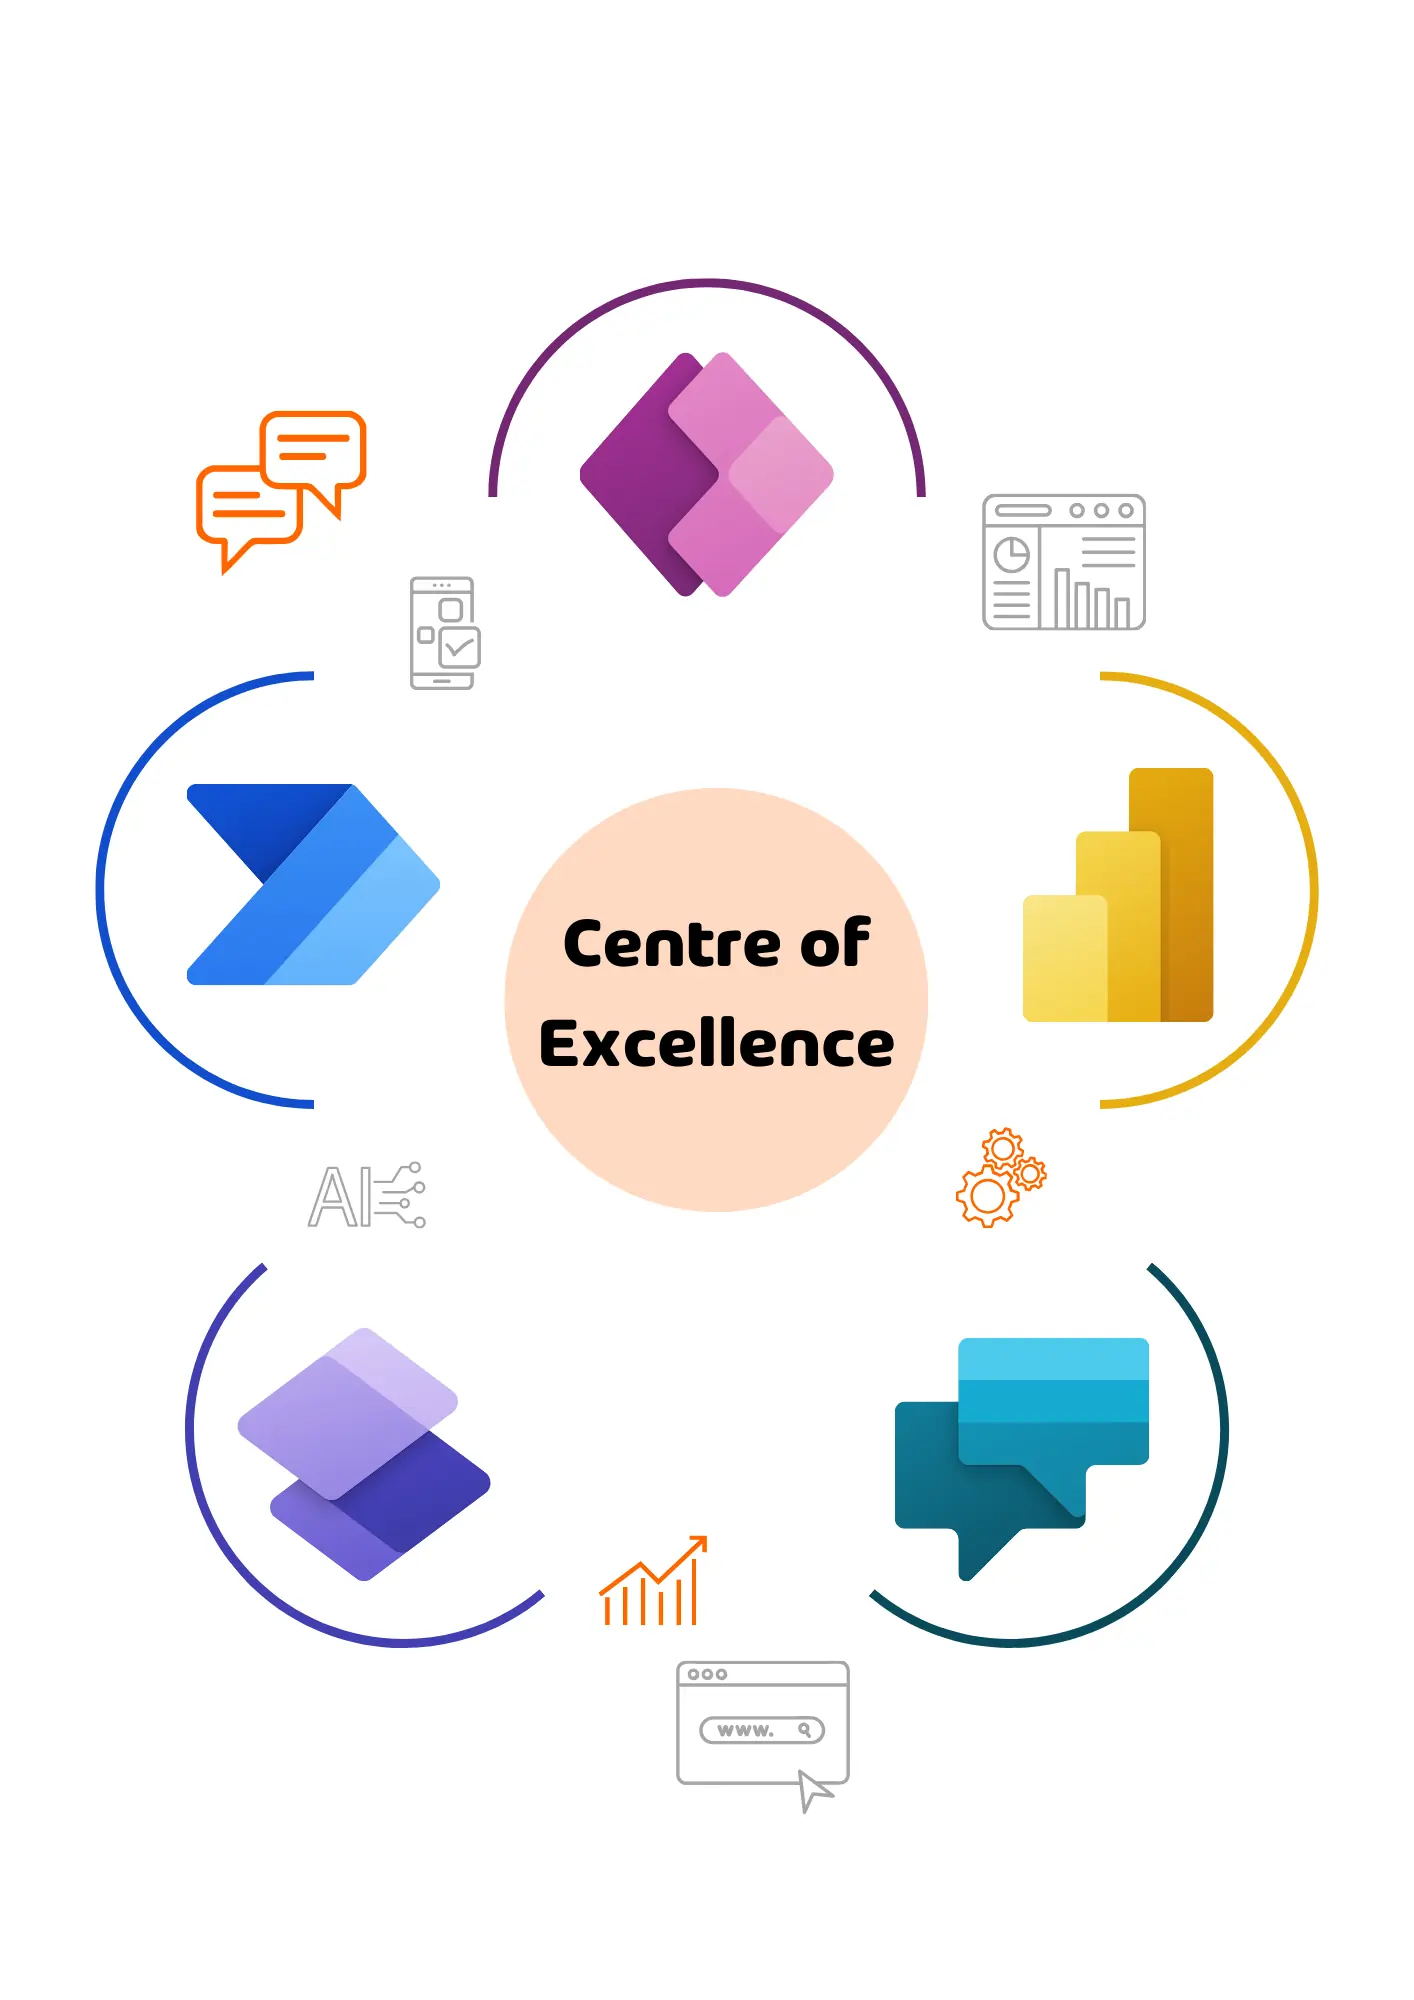 Centre of Excellence in the middle of the Power Platform services